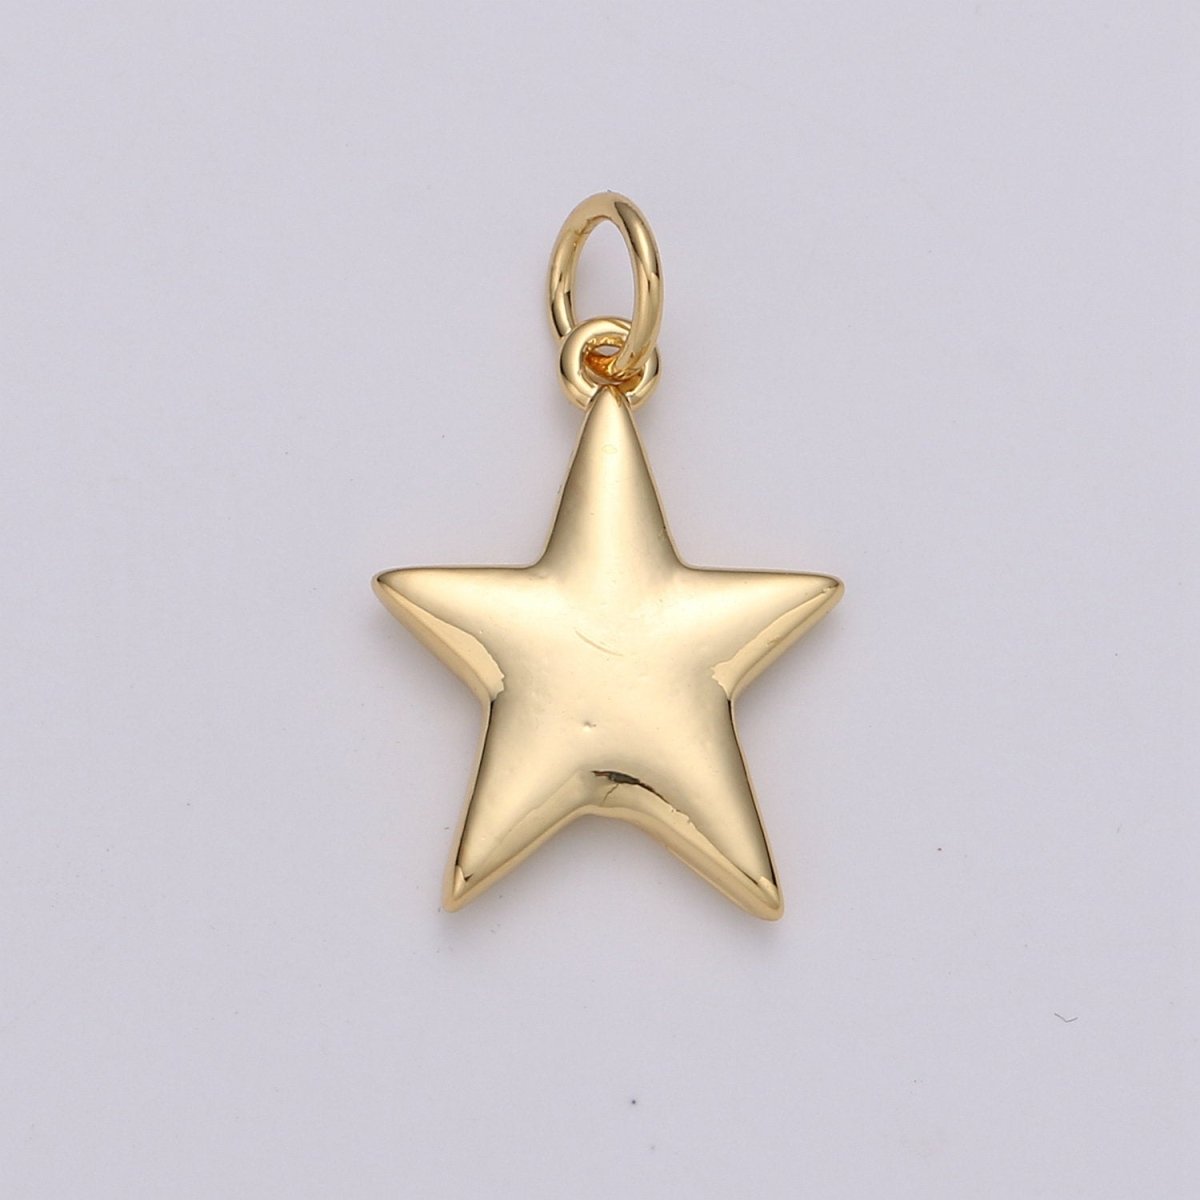 24K Gold Filled Mini Star Charms Double Sided charm for Necklace Earring Bracelet Jewelry Making Supply Celestial Jewelry D-439 - DLUXCA